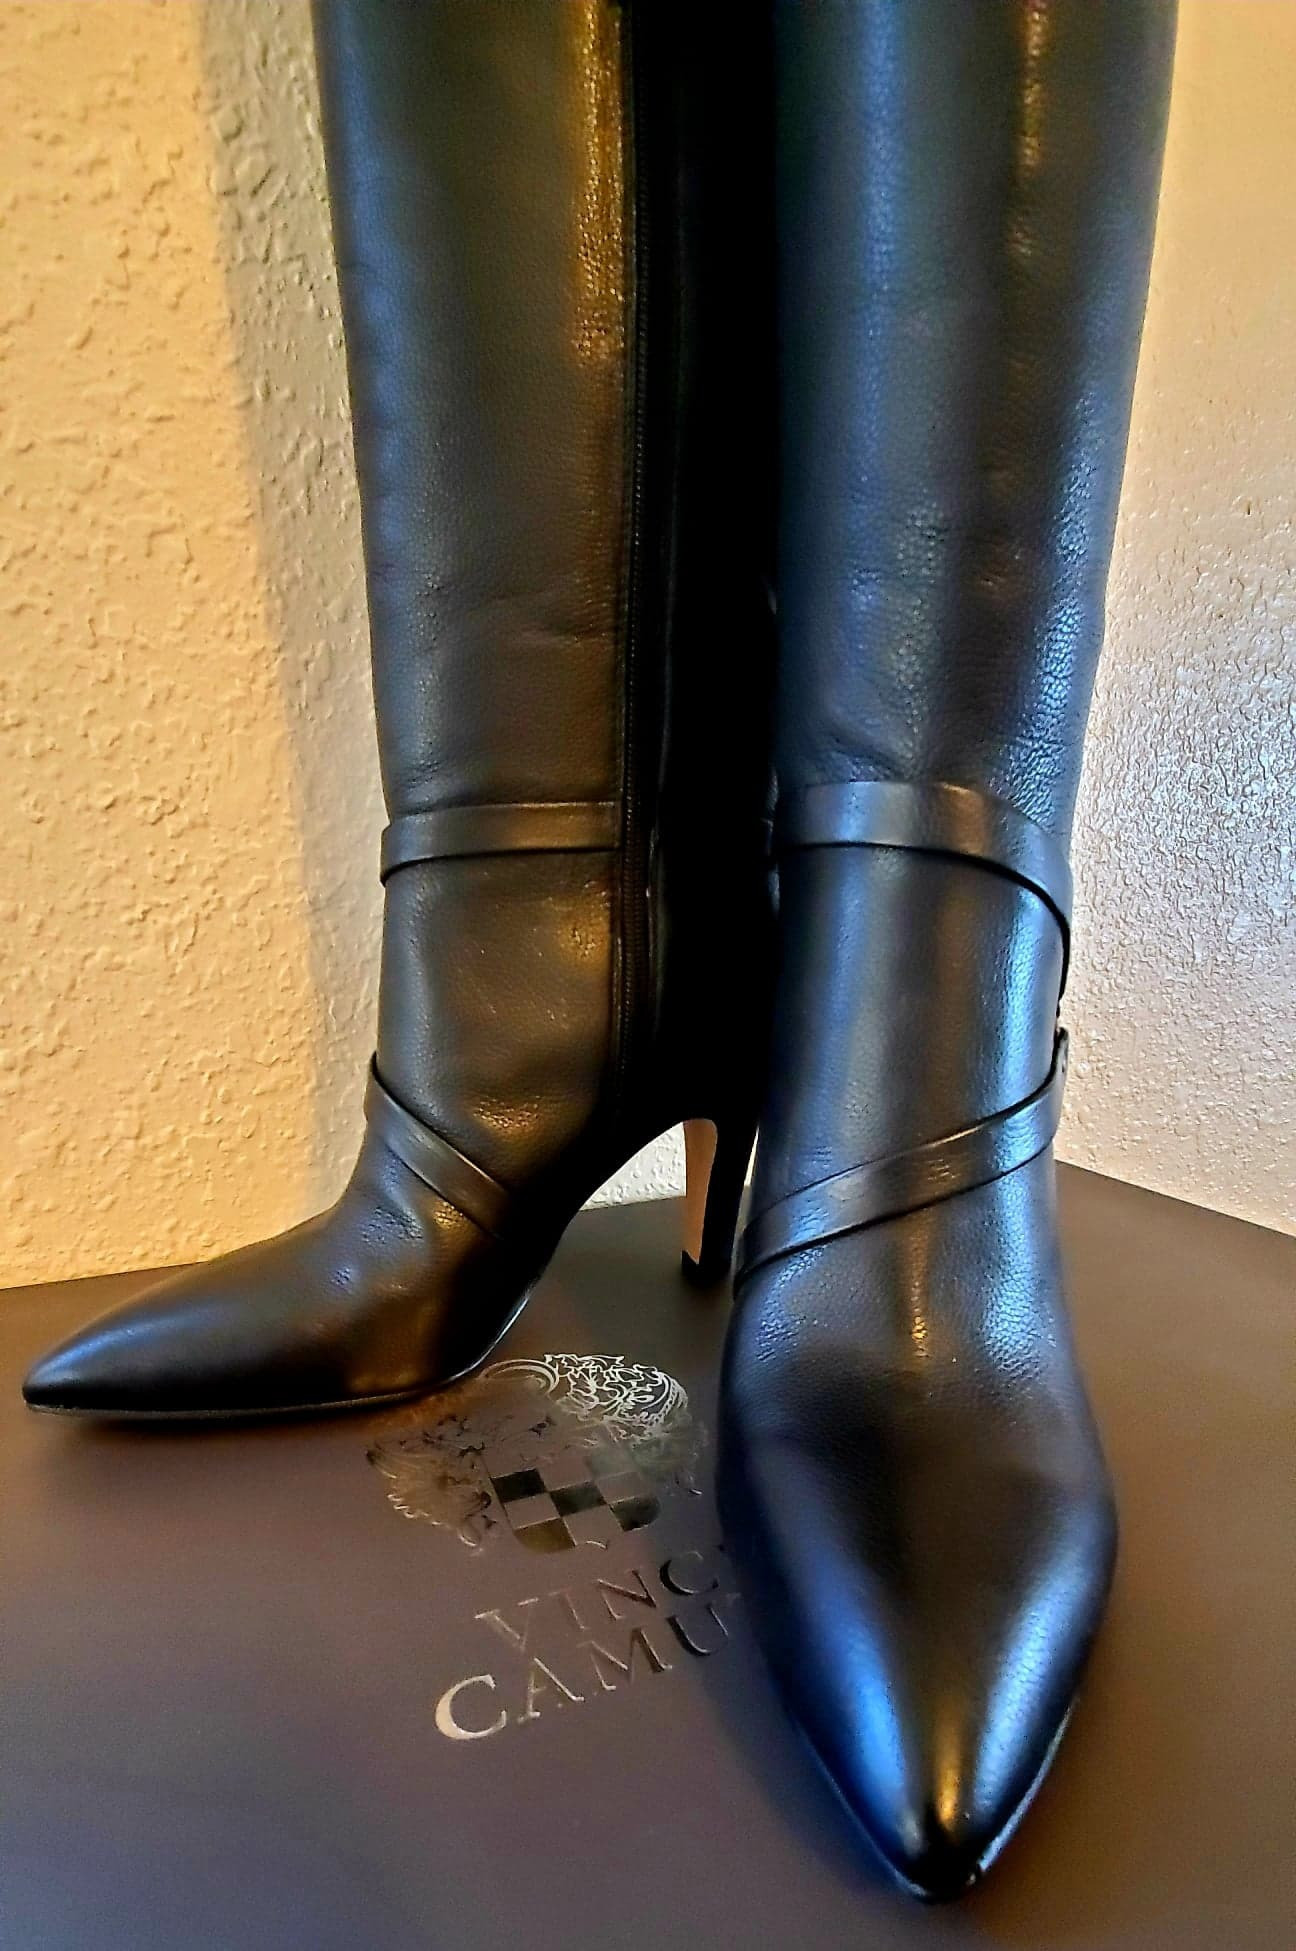 Vince Camuto Women's Tall Boots in size 8, black leather, wide calf, 3 inch heel. 100% authentic.